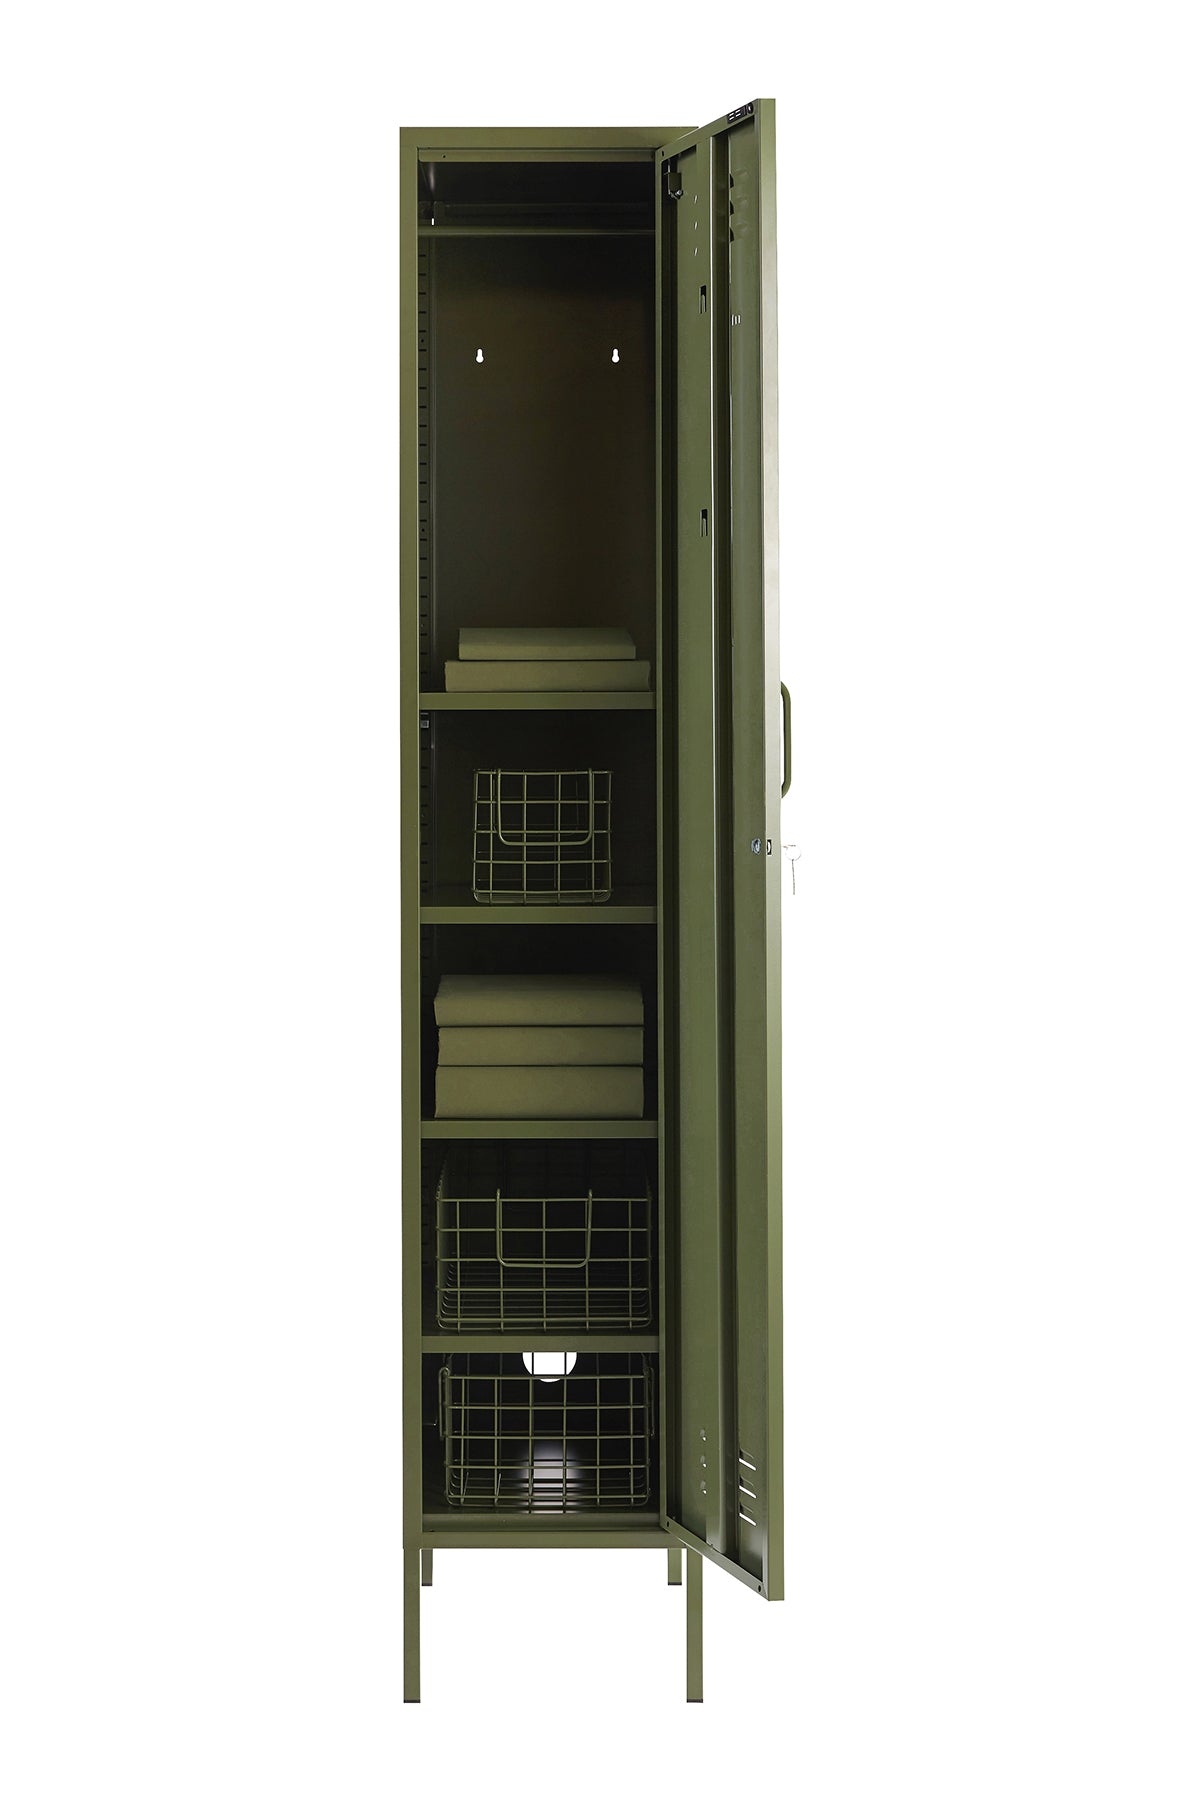 The Skinny Locker in Olive By Mustard Made